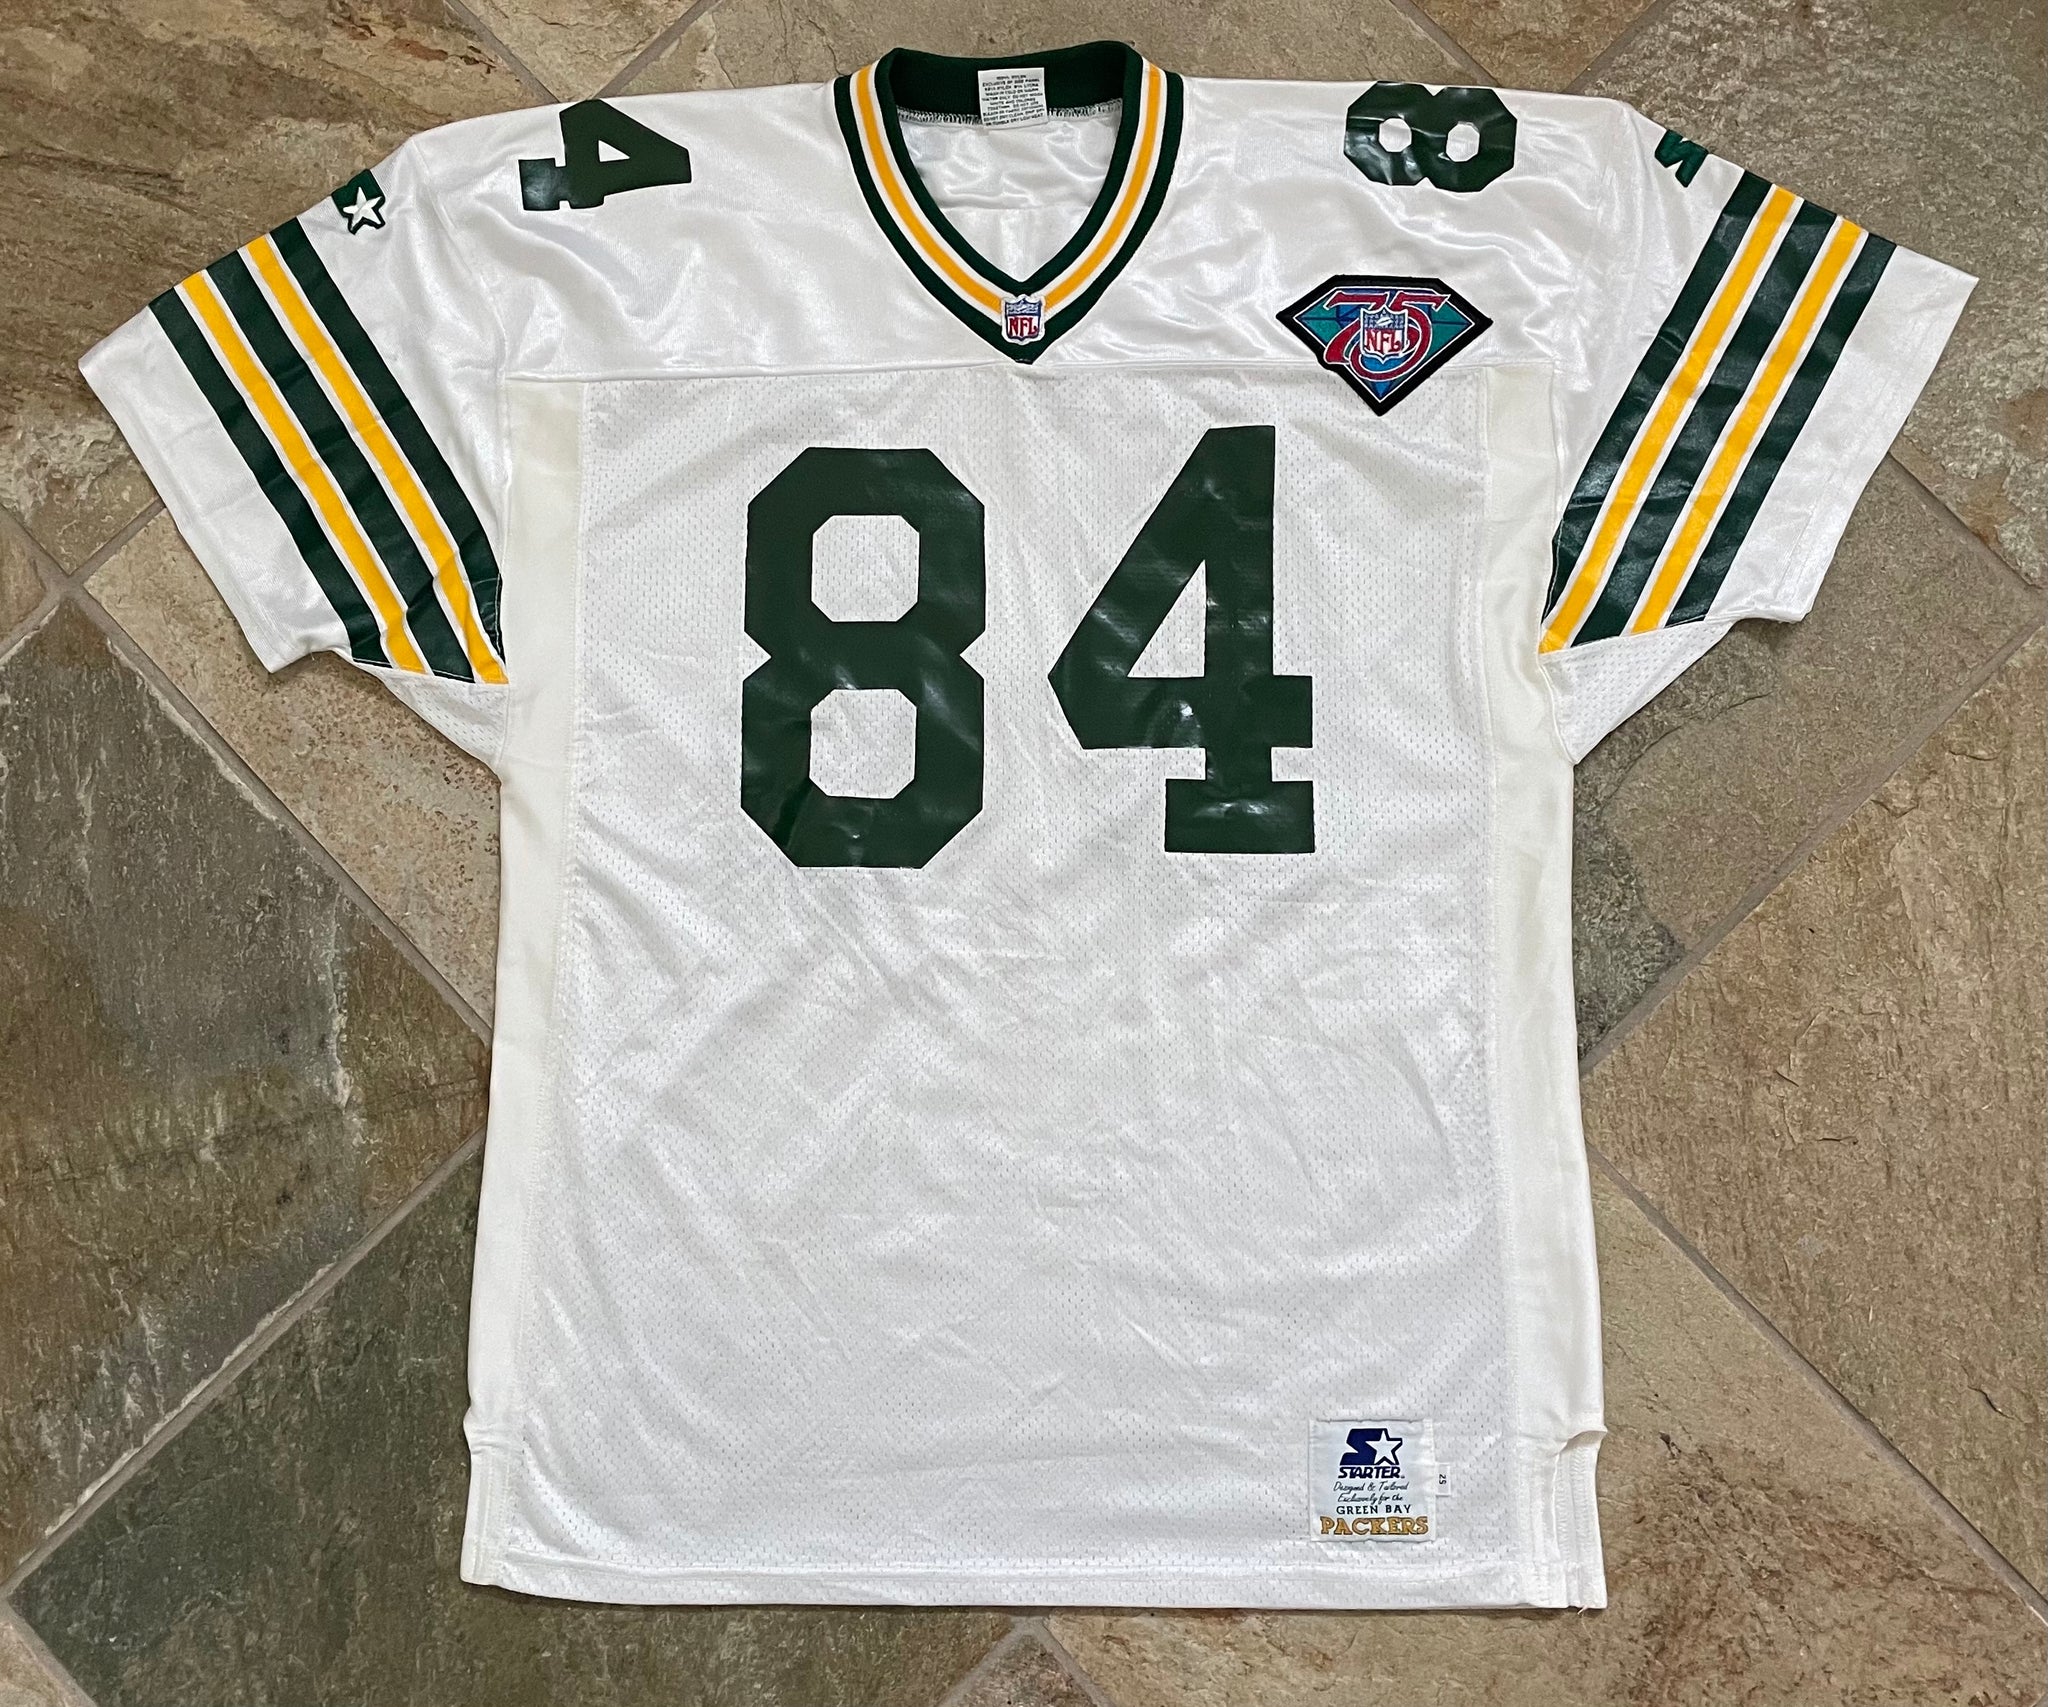 Green Bay Packers Jerseys  New, Preowned, and Vintage